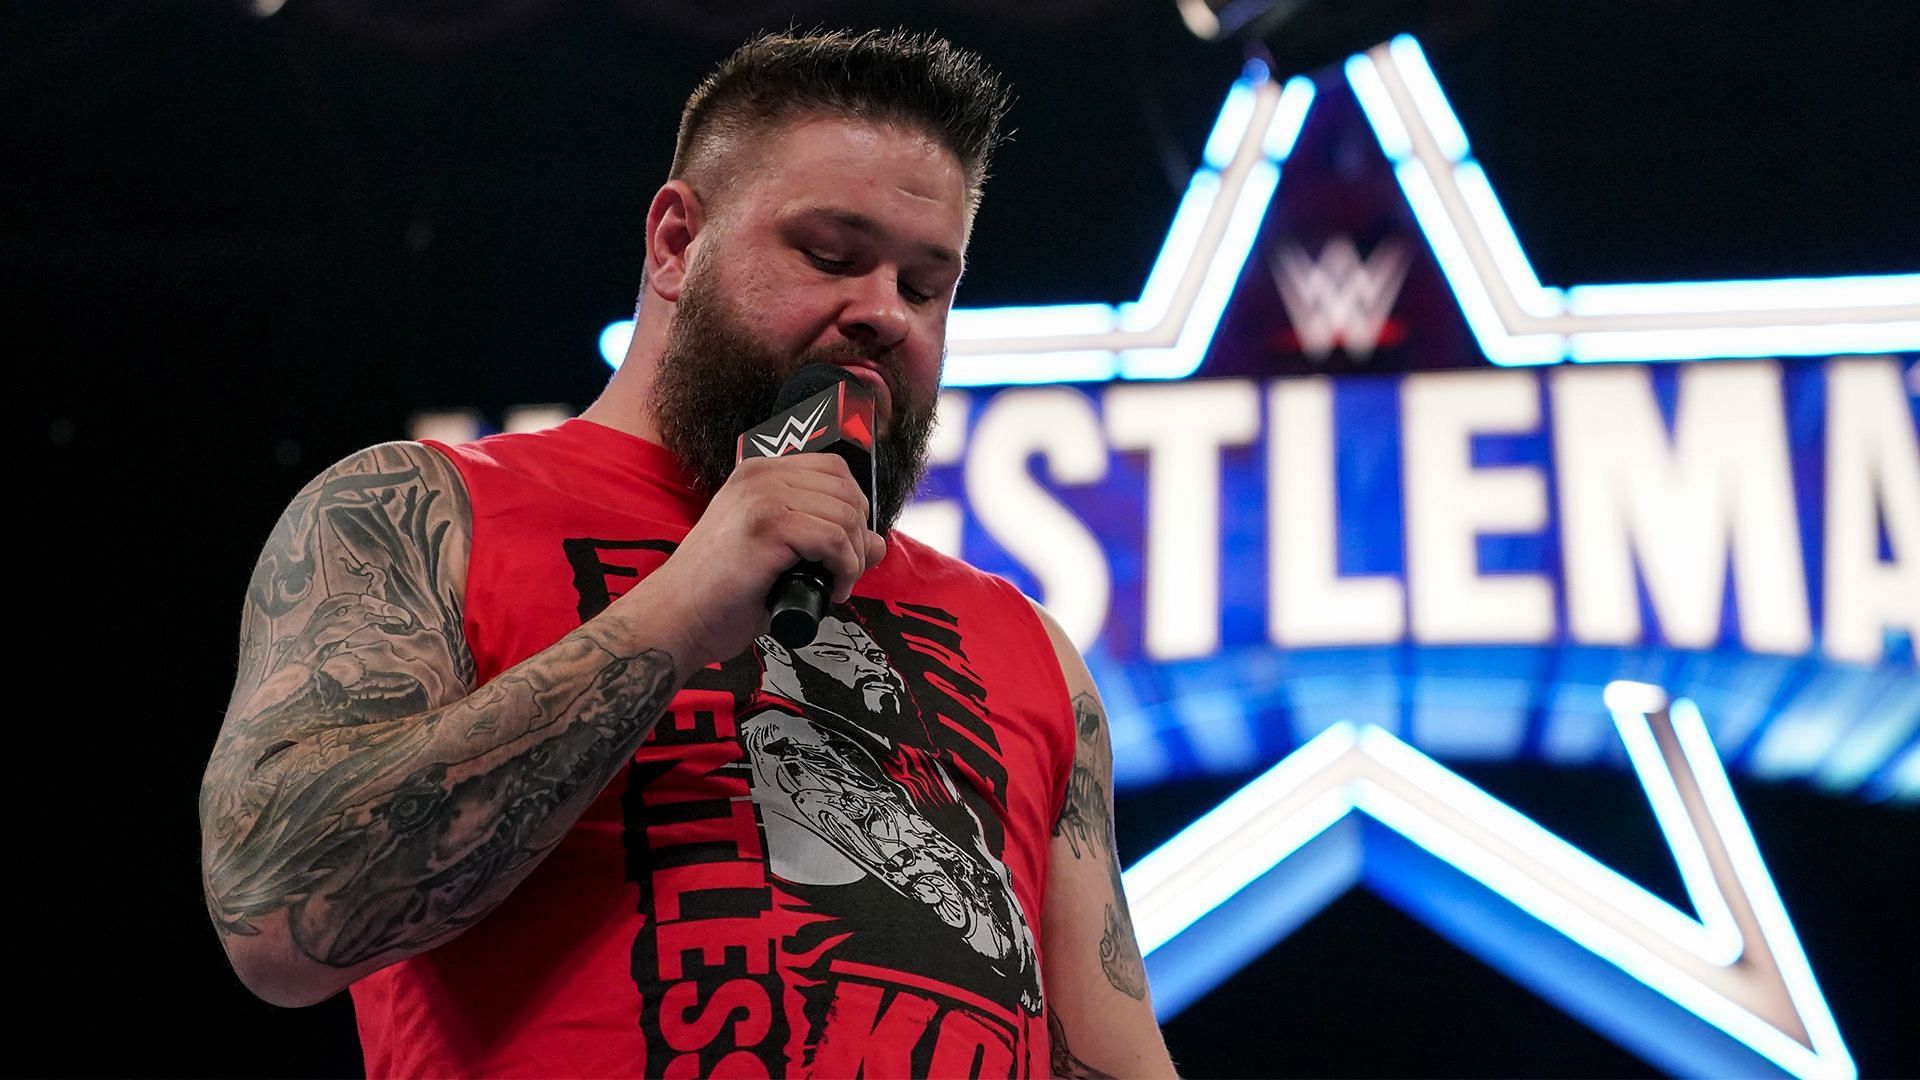 The Prizefighter was one of the highlights of WrestleMania 38